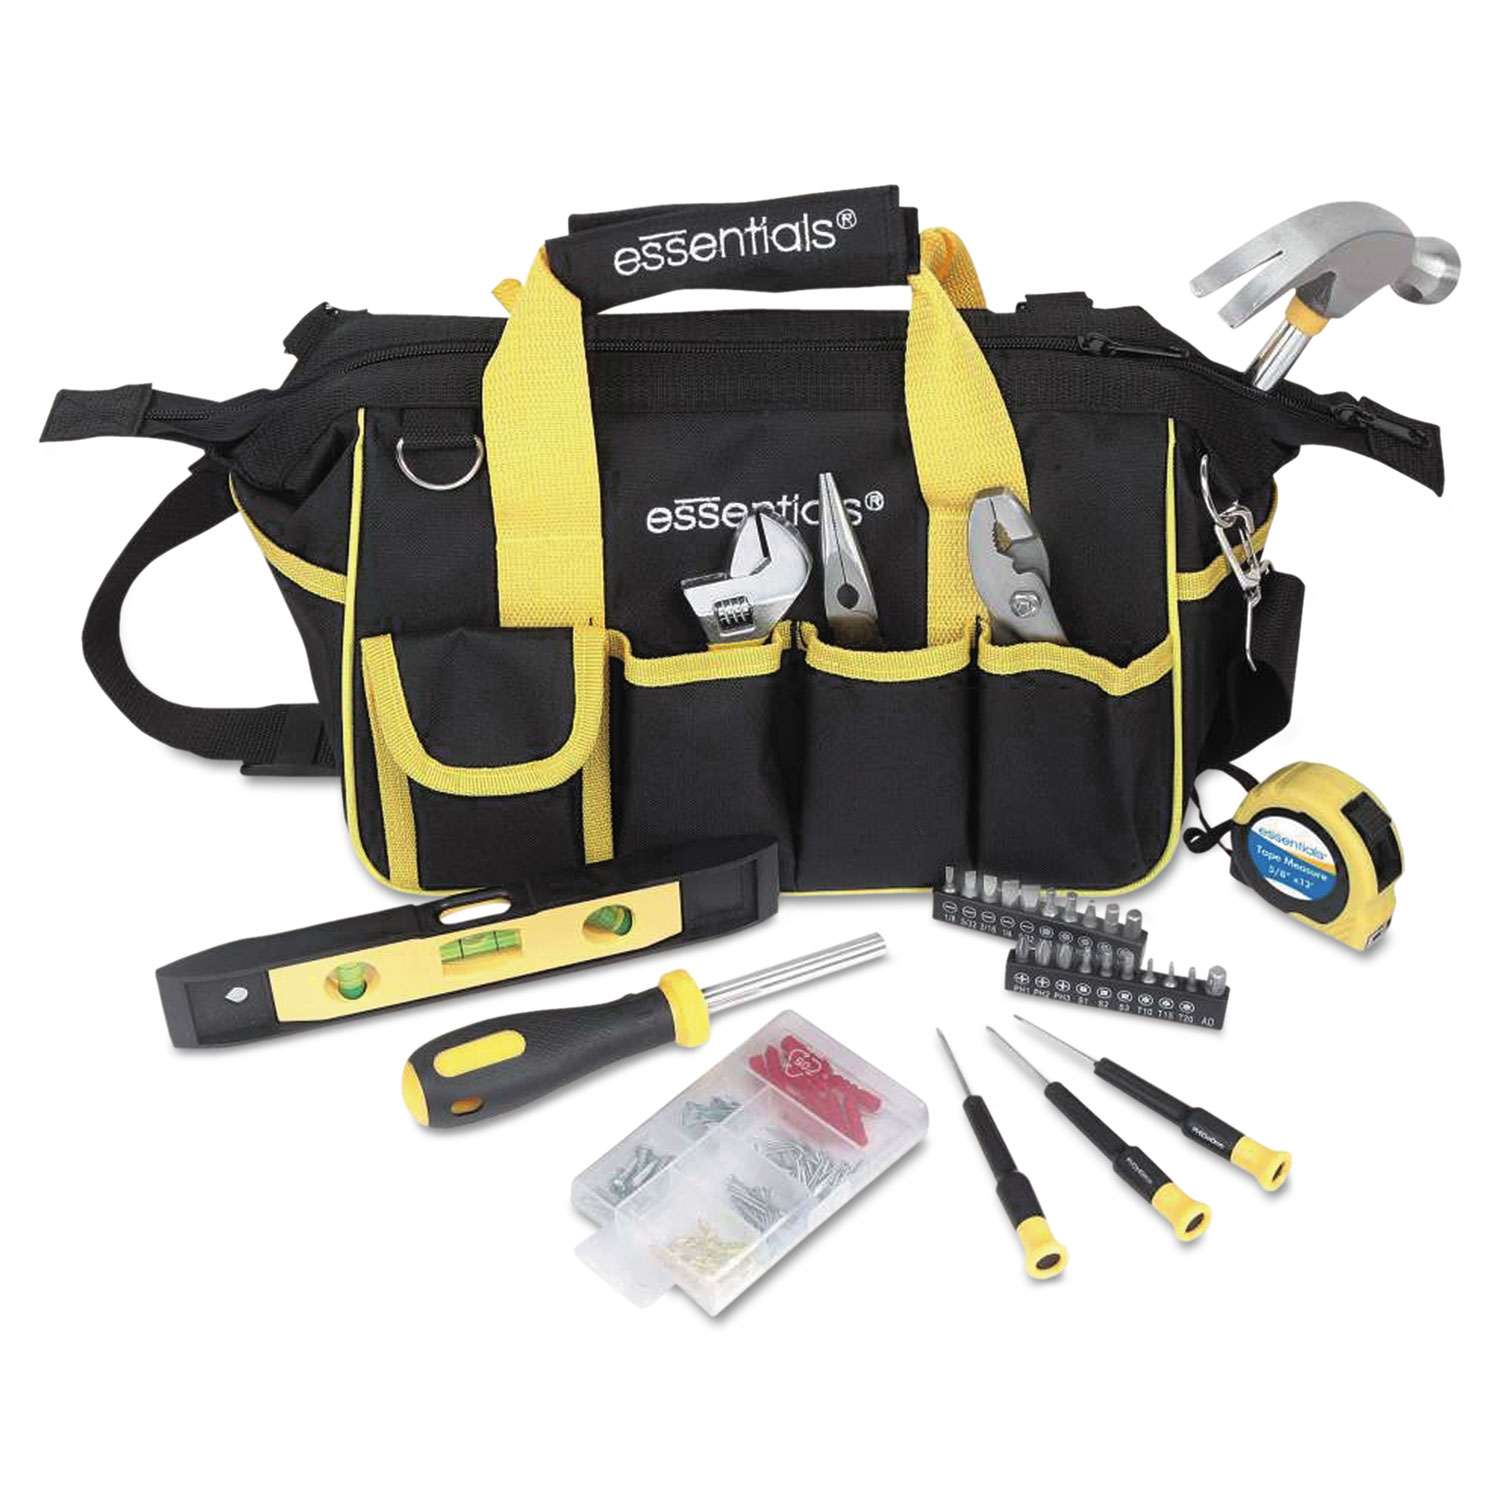  Great Neck 21044 32-Piece Expanded Tool Kit with Bag (GNS21044) 